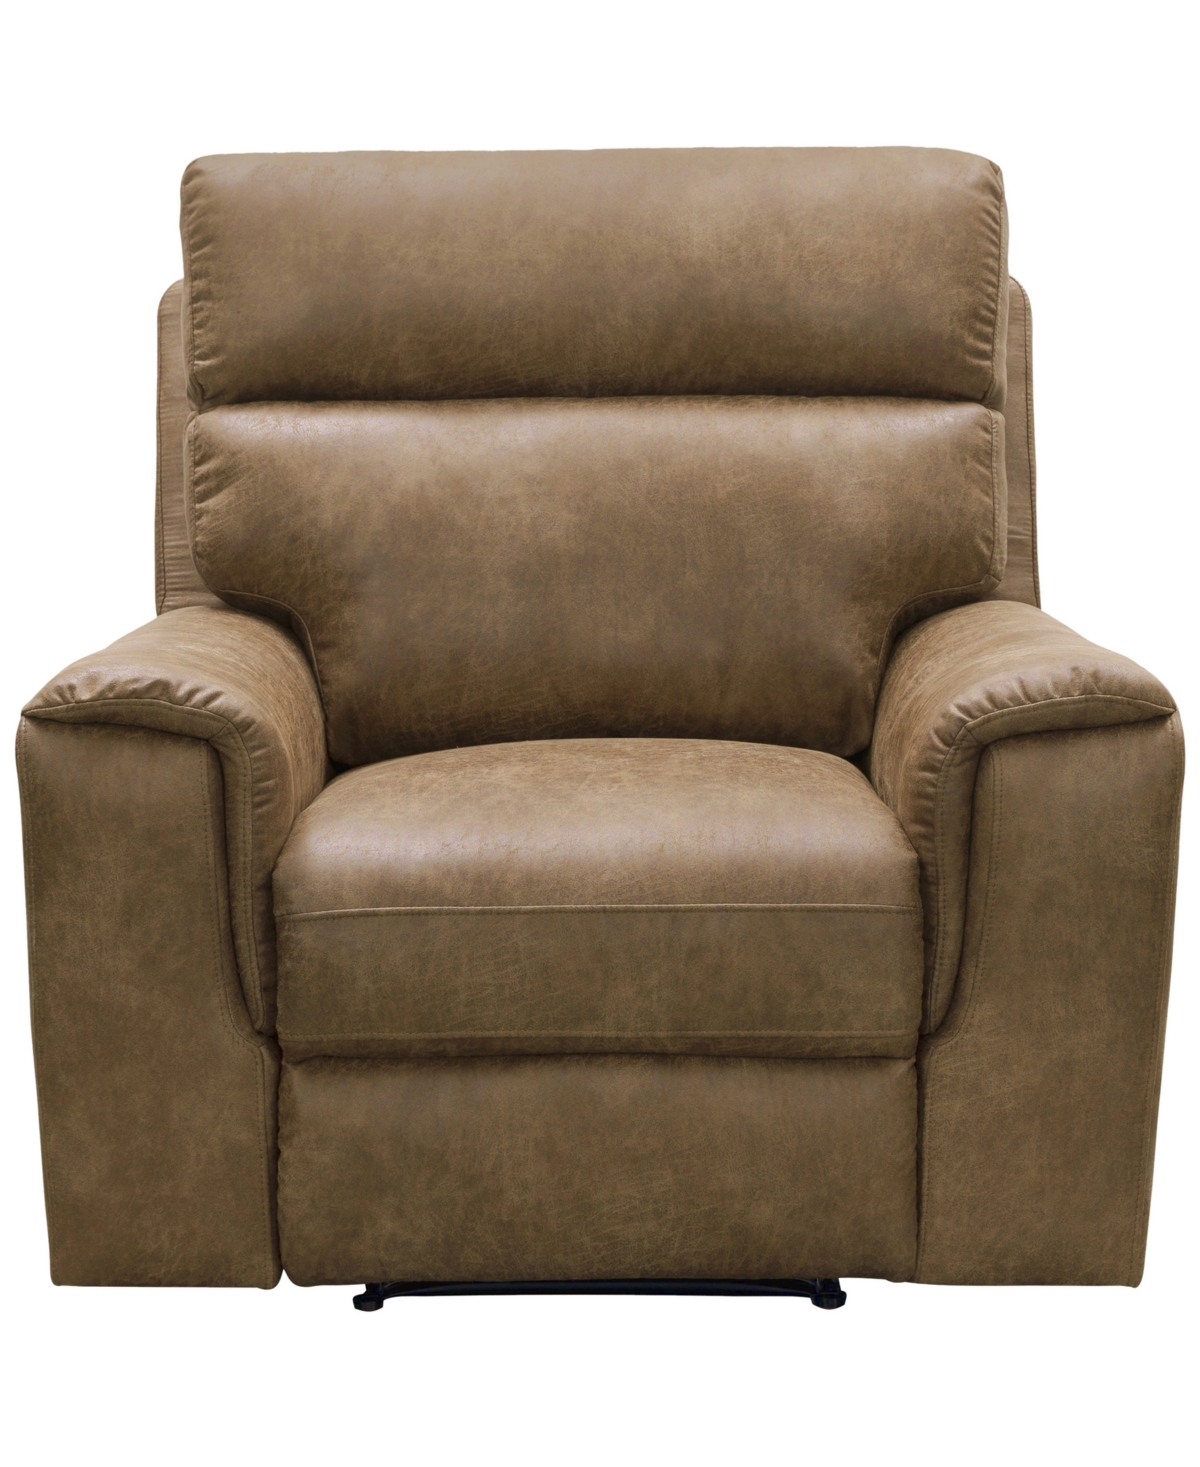 Abbyson Living Lawrence 39.5" Fabric Recliner In Camel